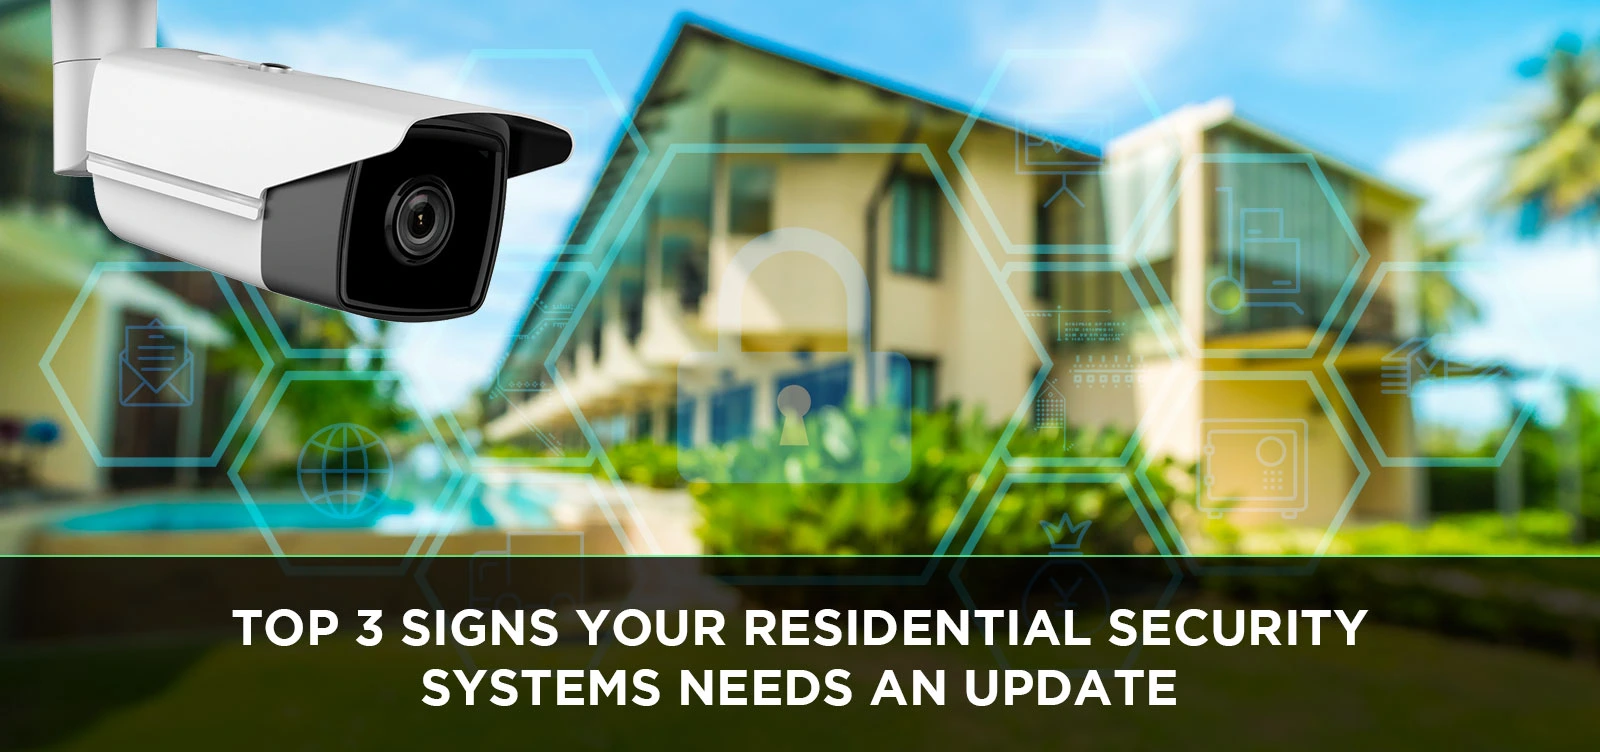 Top 3 Signs Your Residential Security Systems Needs an Update